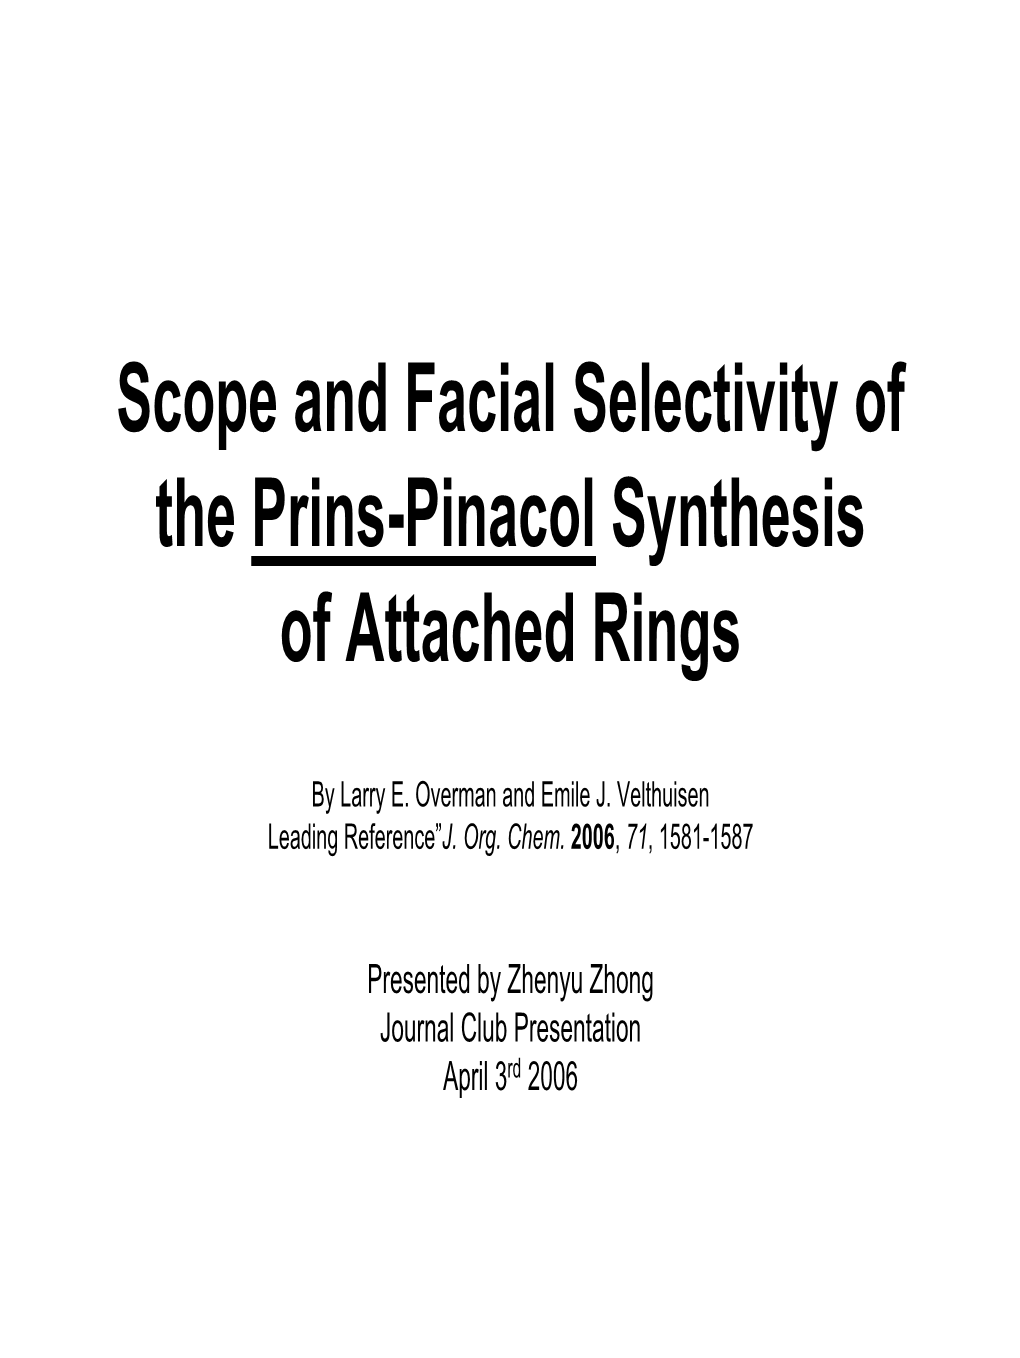 Scope and Facial Selectivity of the Prins-Pinacol Synthesis of Attached Rings